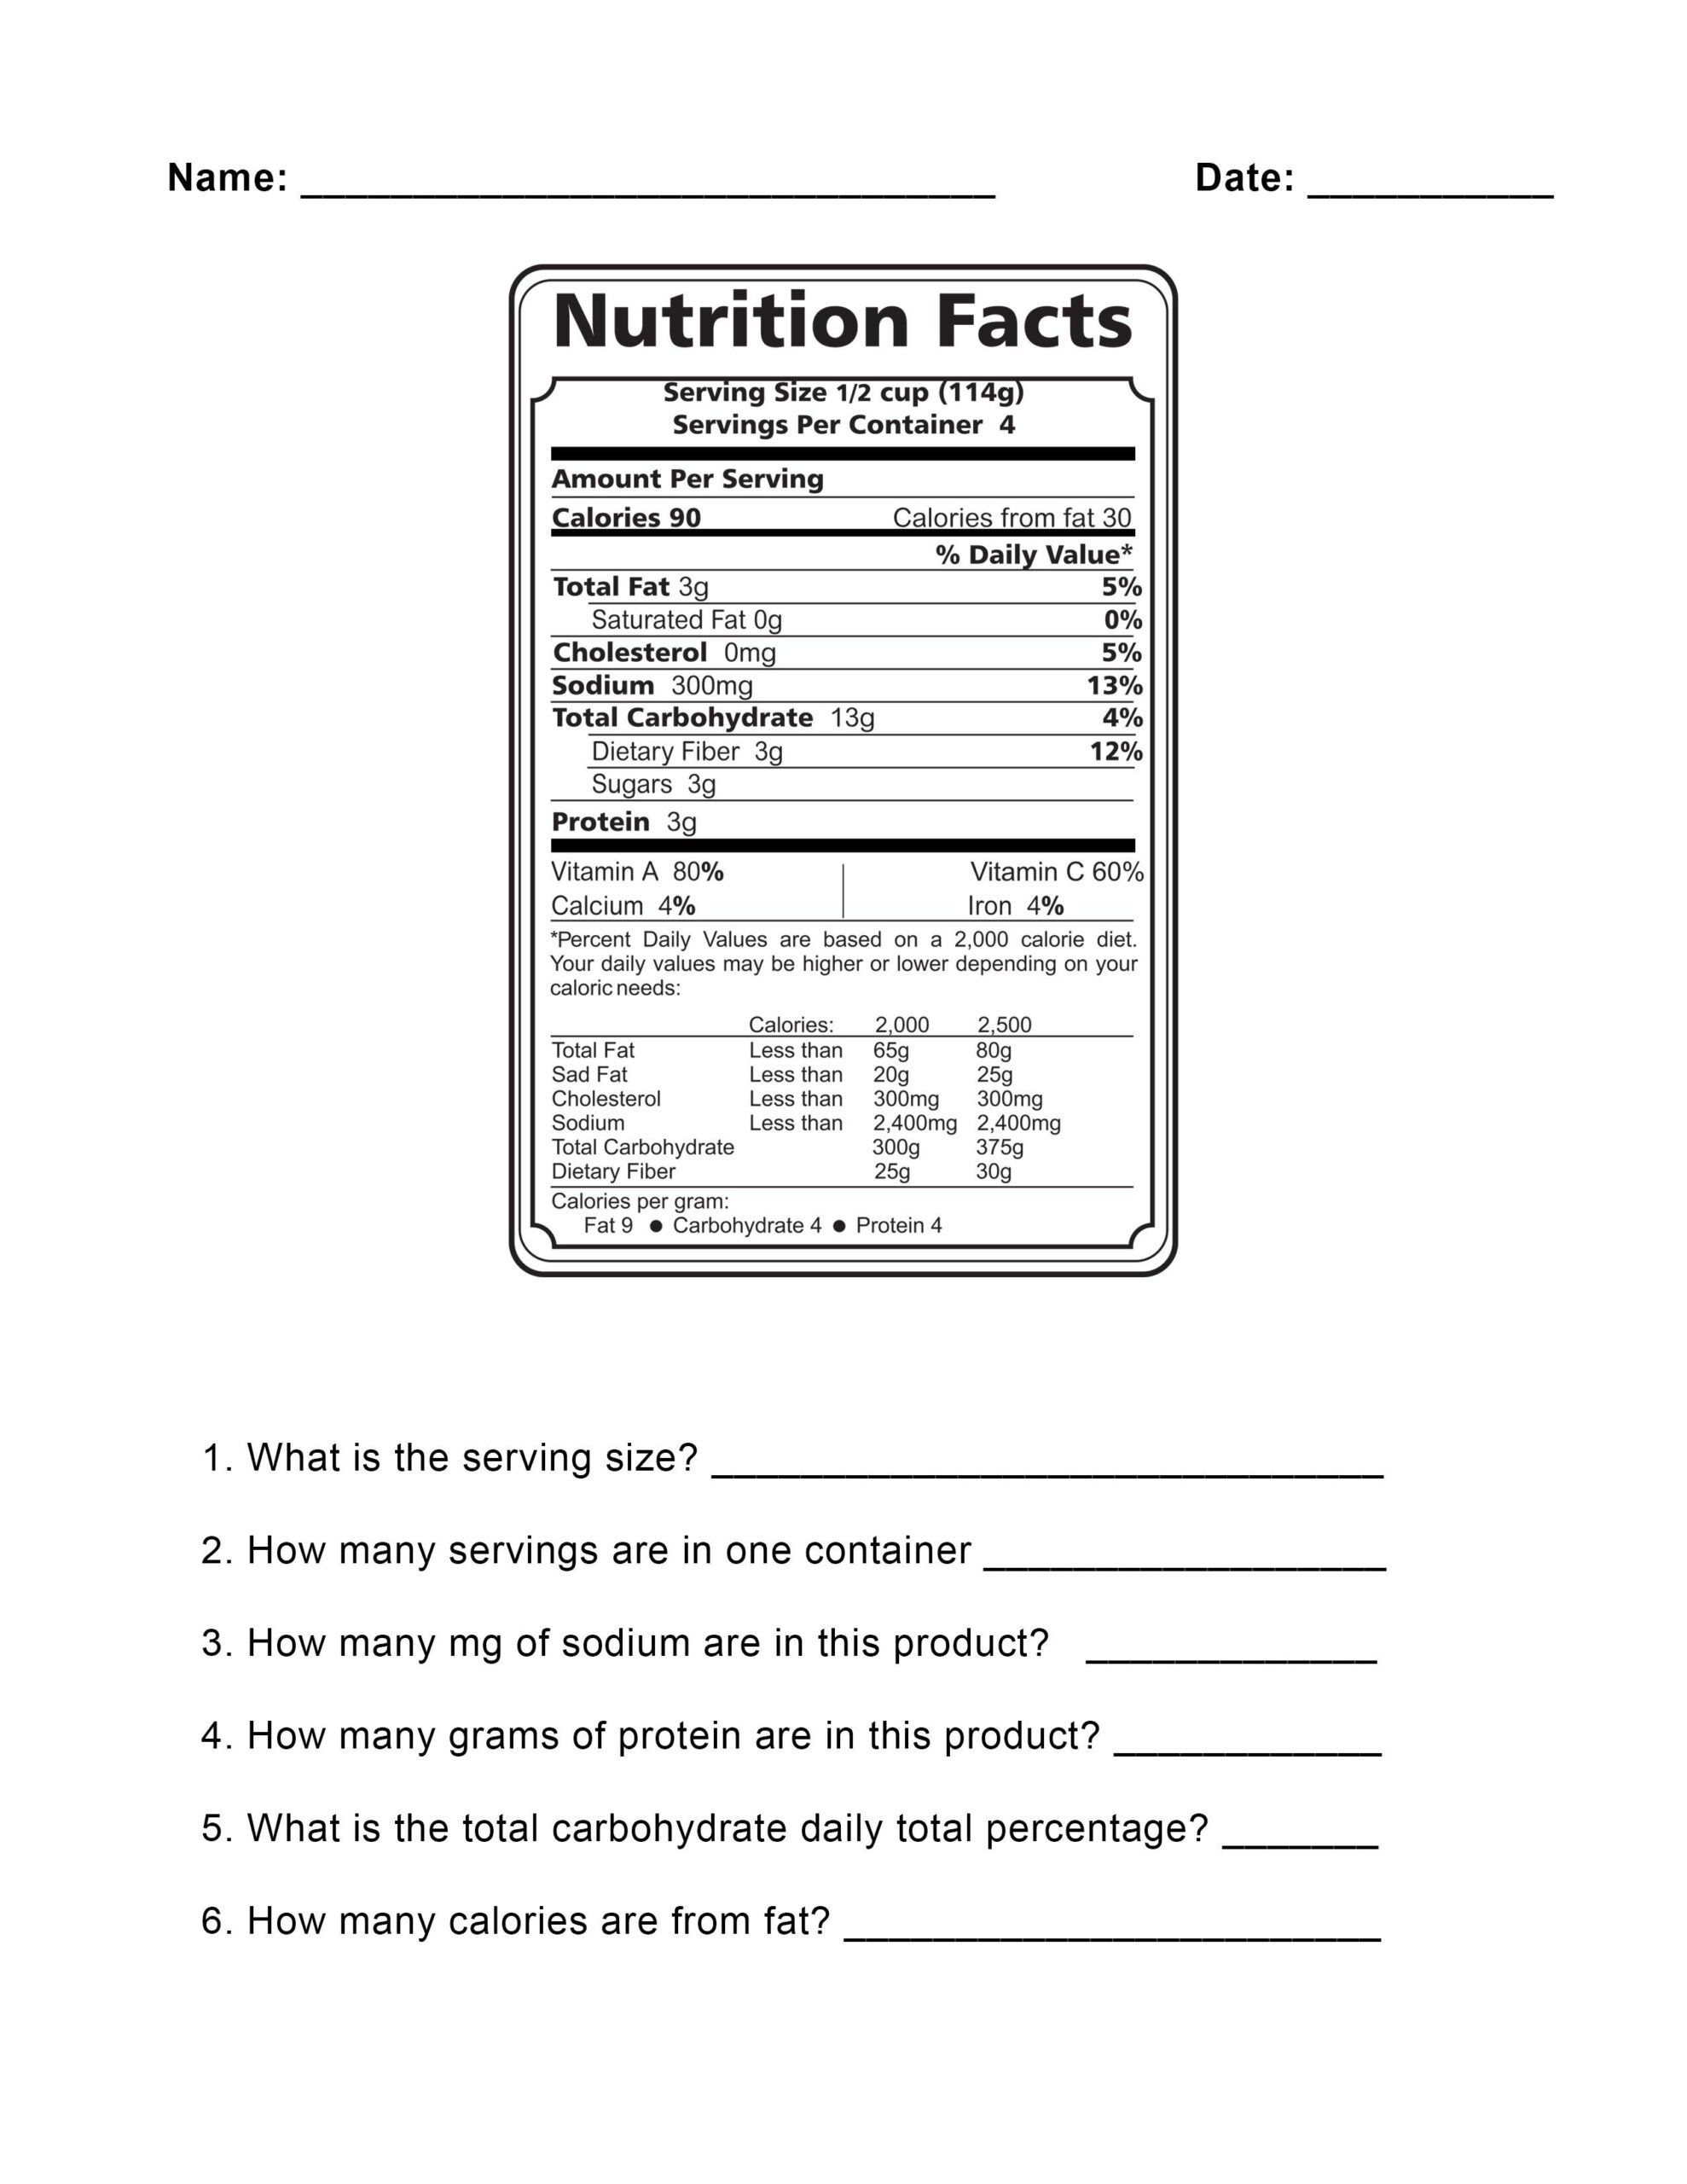 Food Label Tips Nutrition Facts Label Reading Food Labels Nutrition 